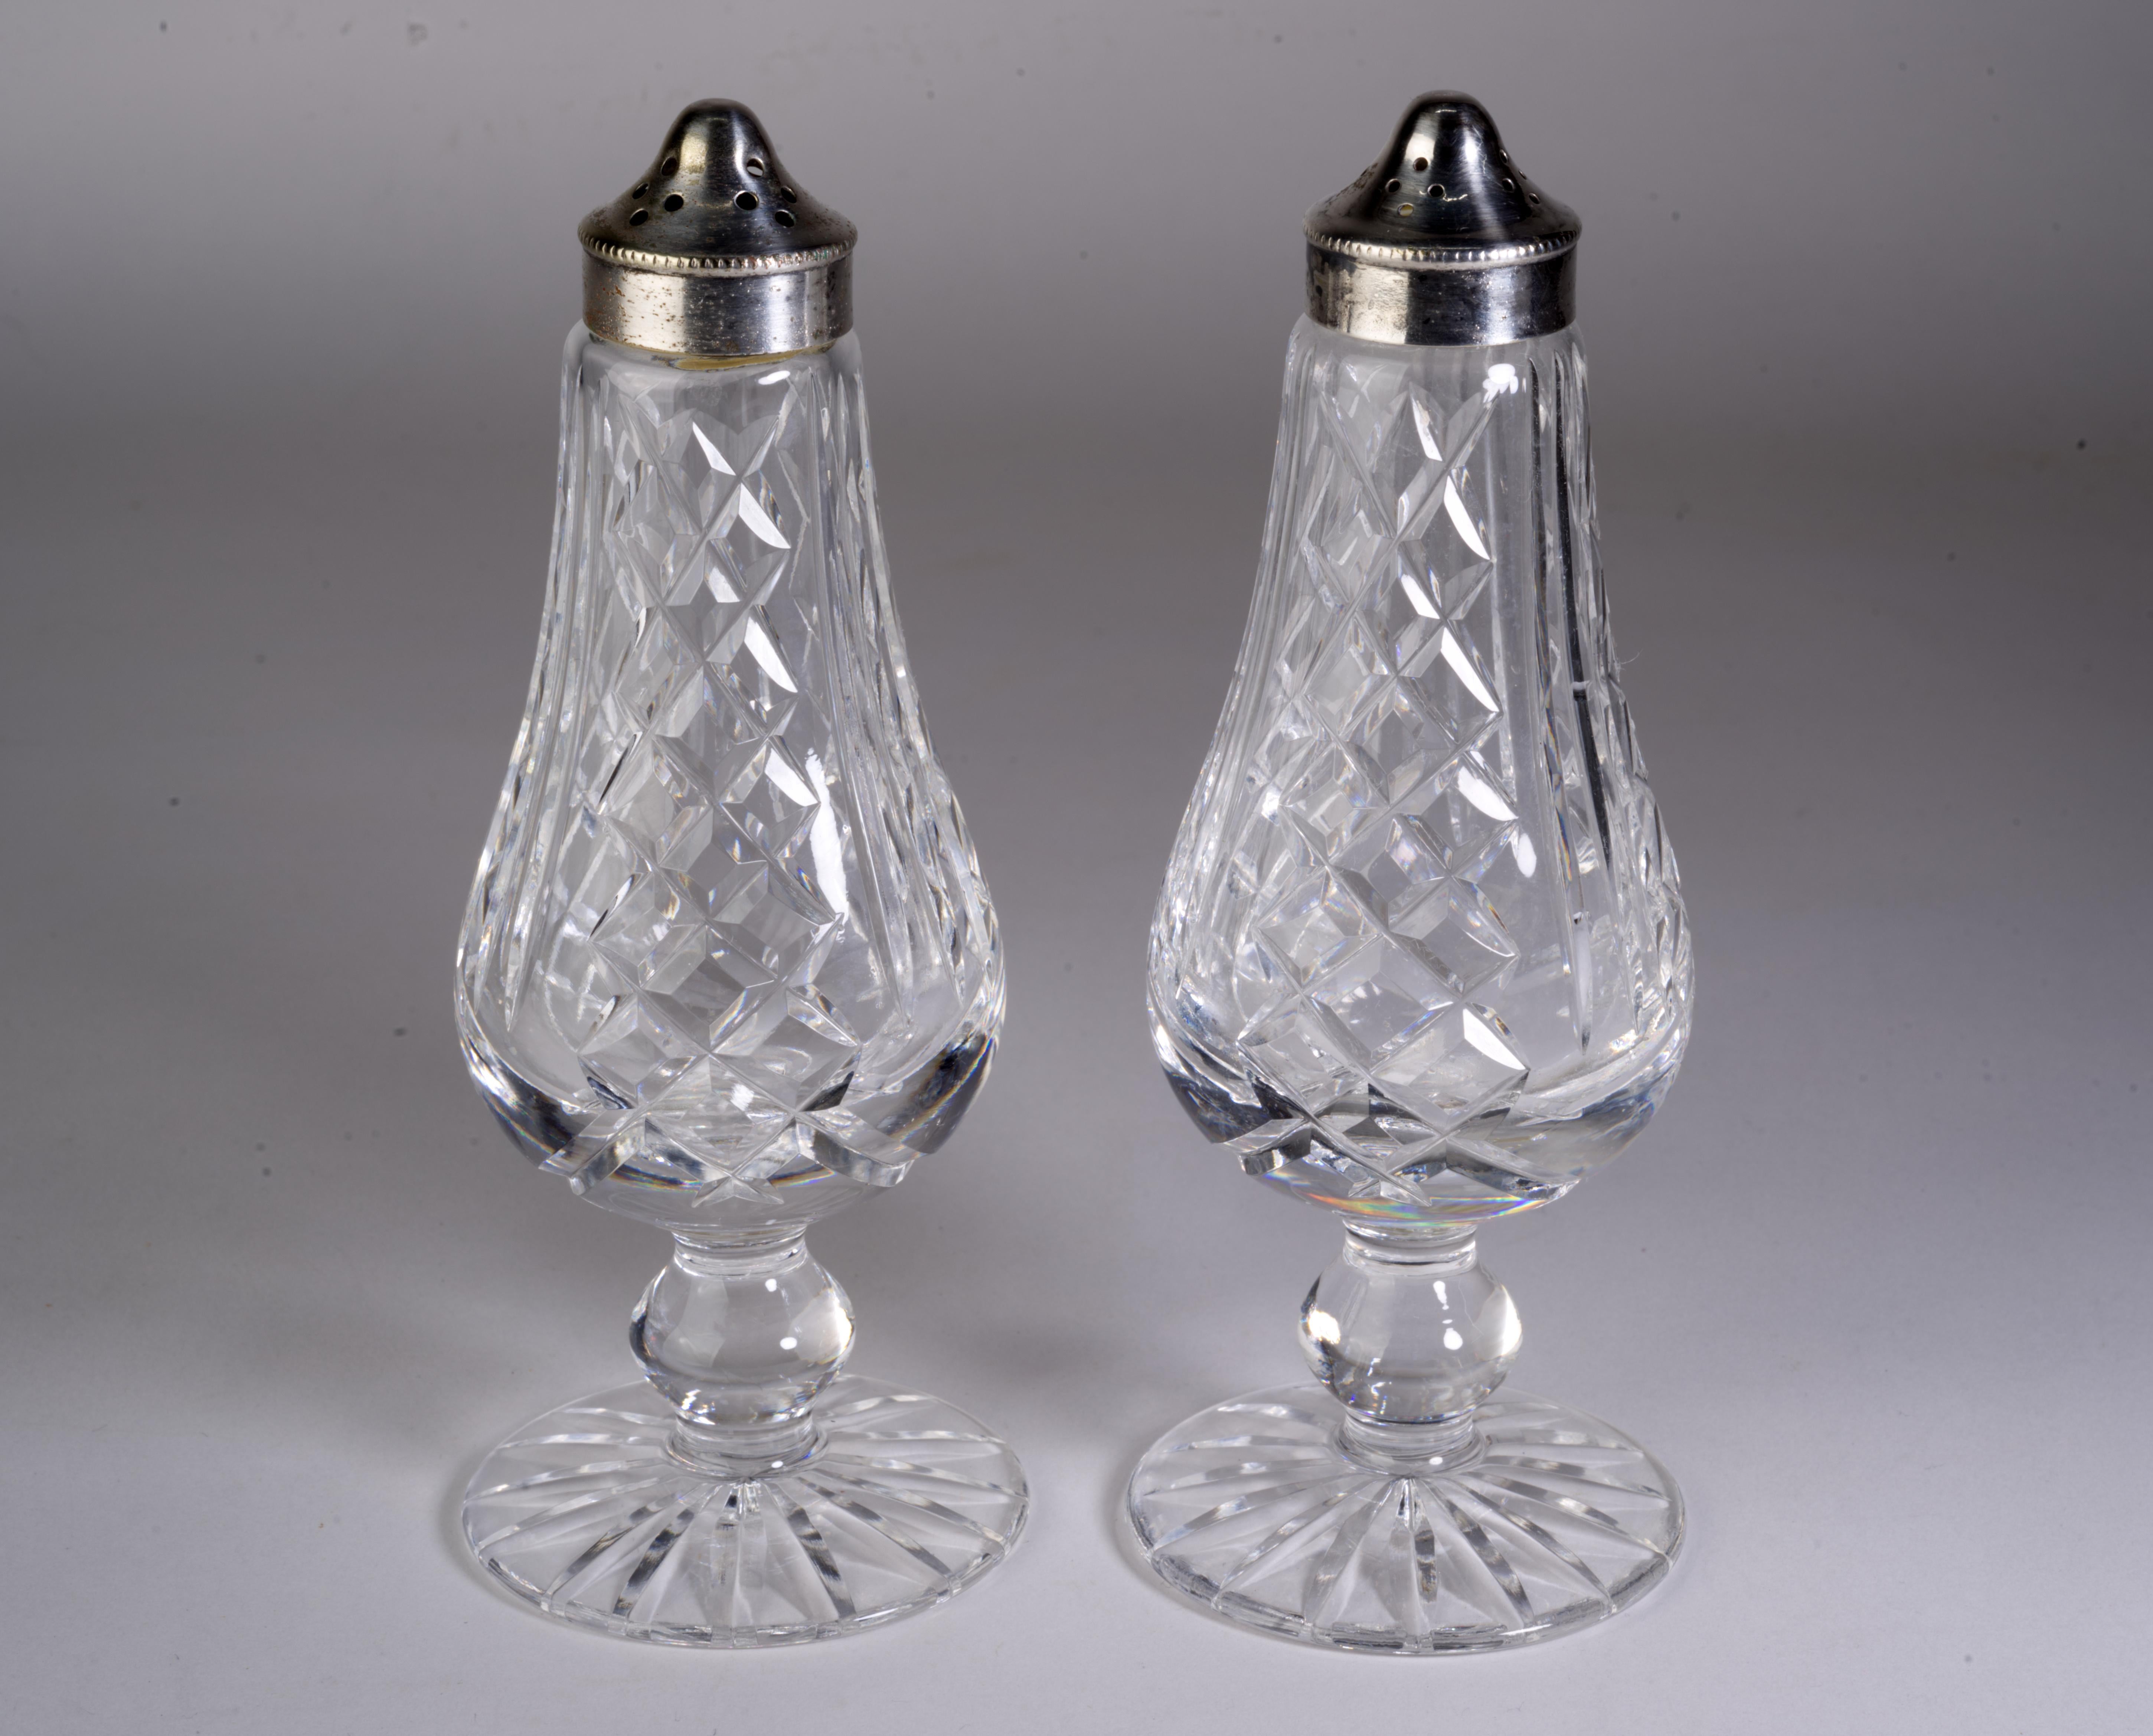  Vintage Waterford Crystal salt and pepper shakers were made in Republic of Ireland of cut crystal with silverplate covers. Glendariff pattern is characterized by vertical cuts and stacked cut X's with starburst cut bottoms; it was manufactured from